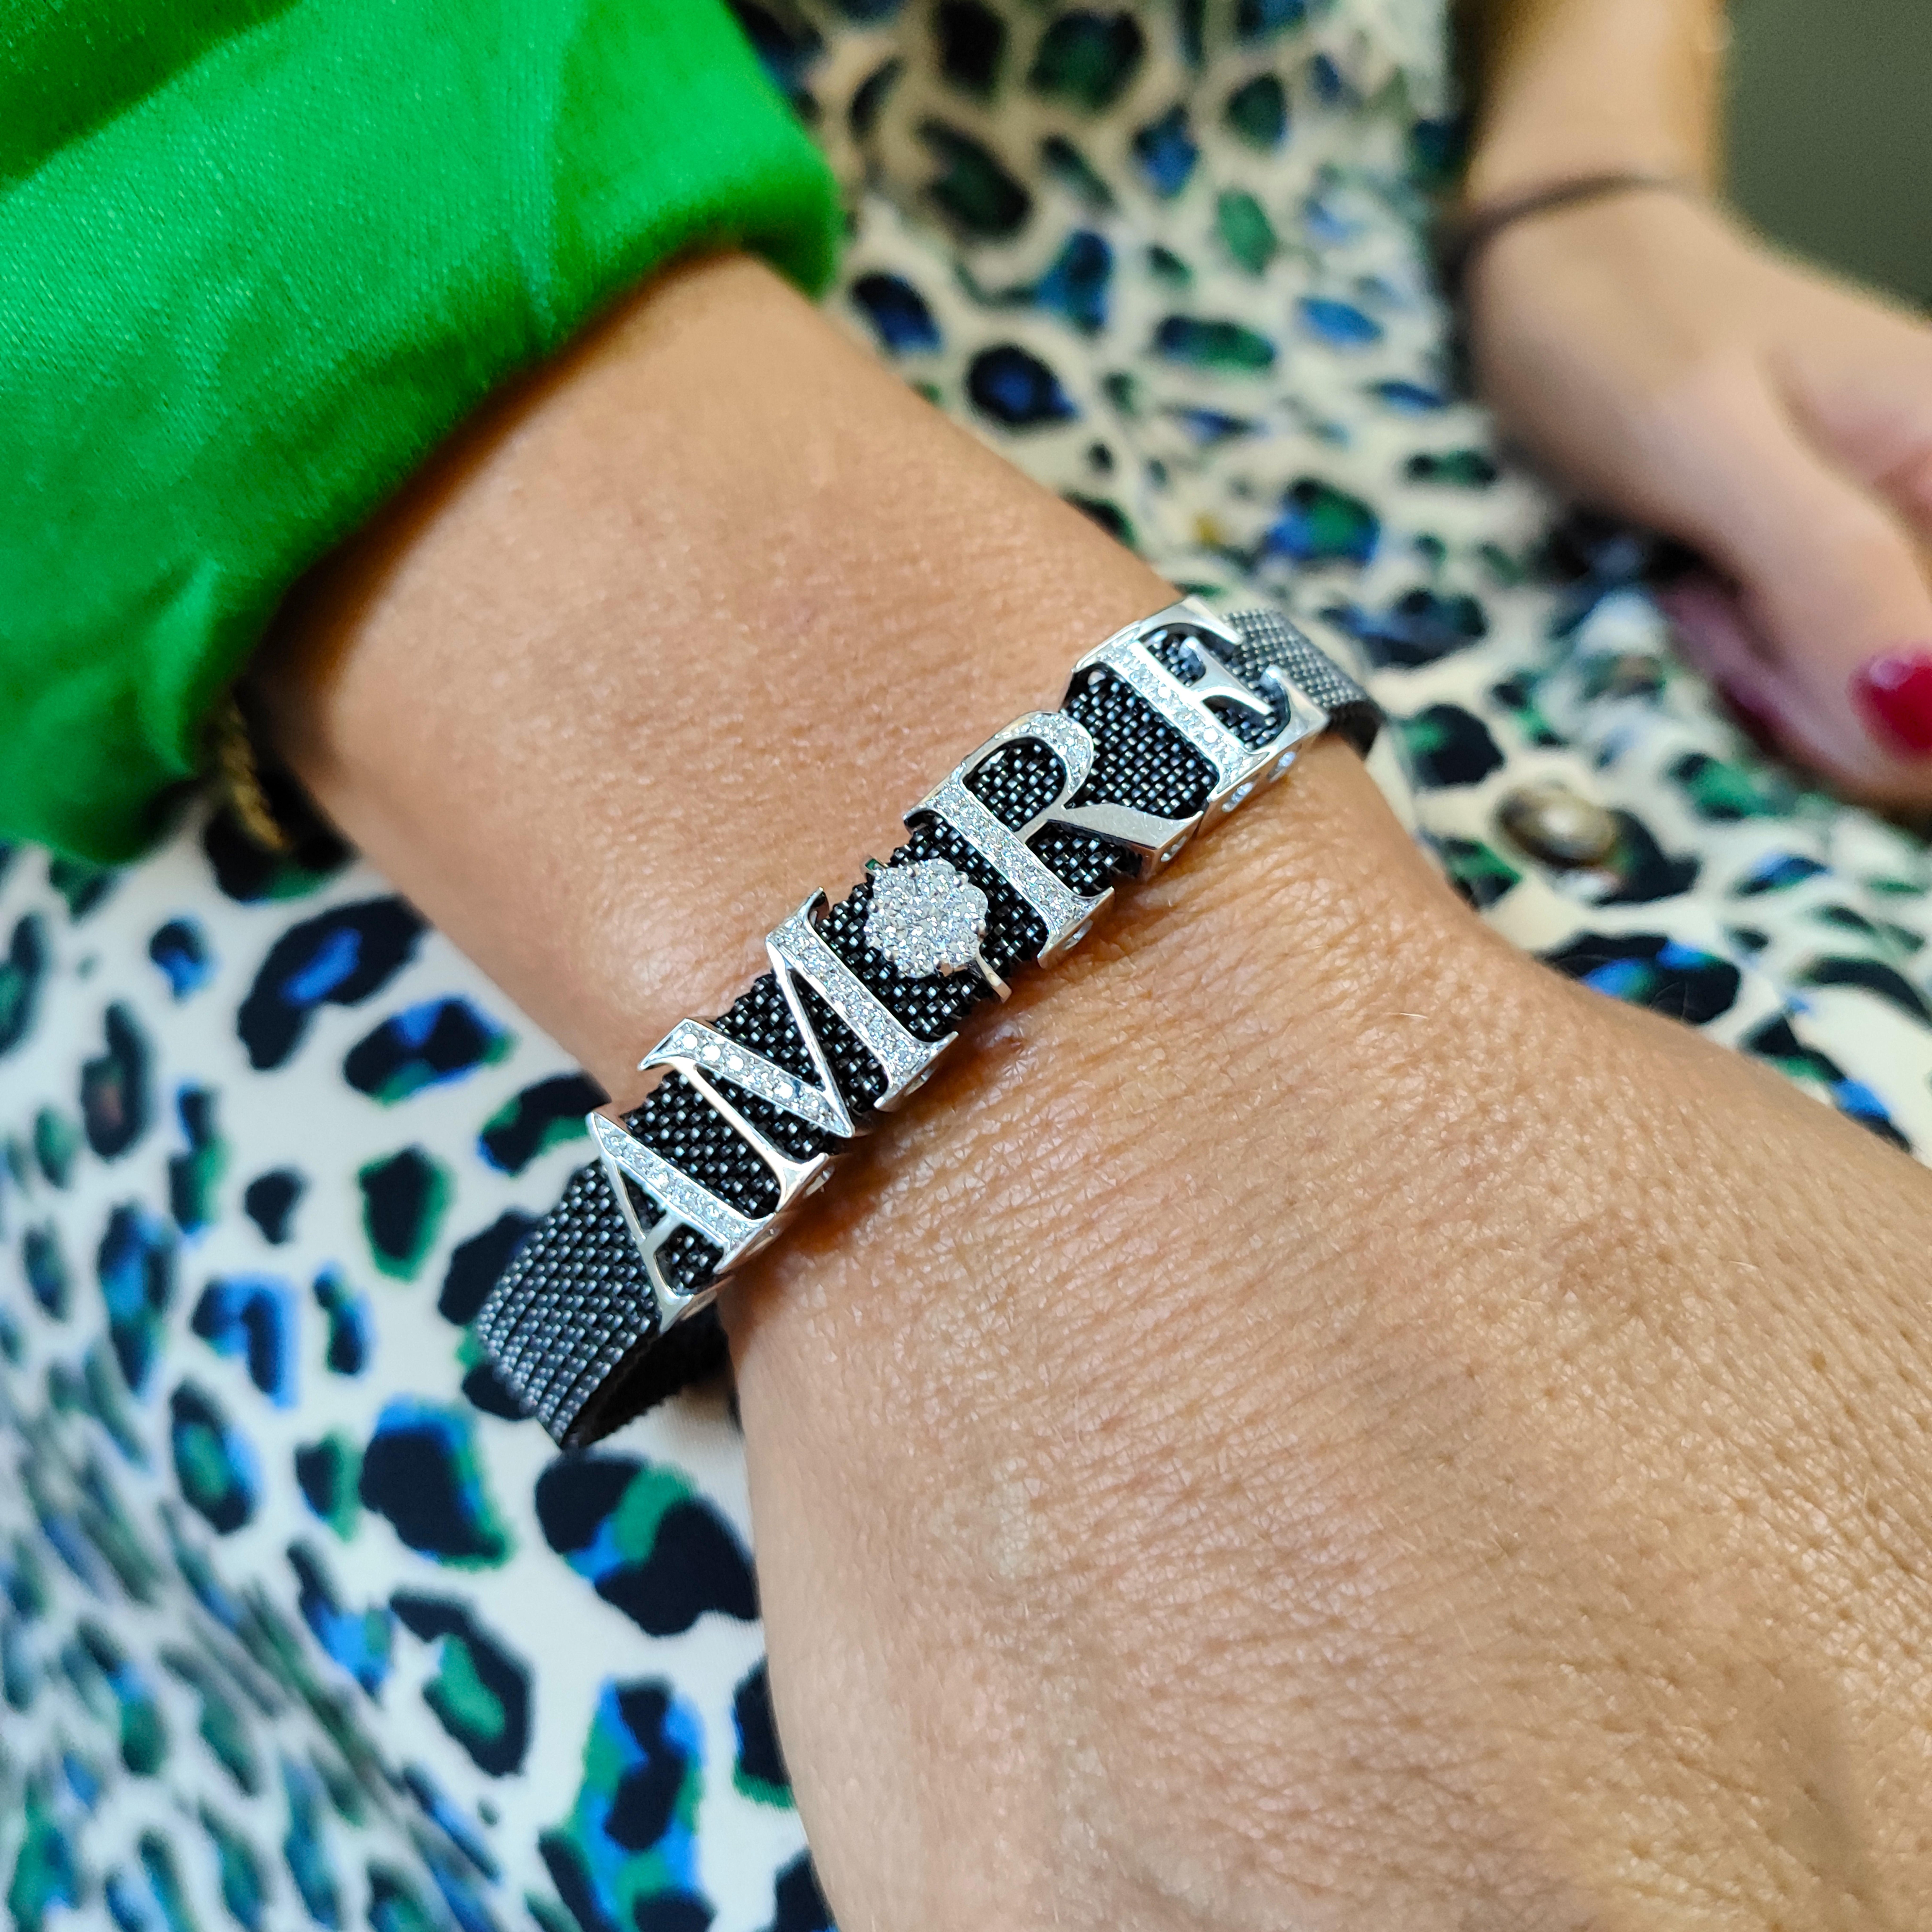 This elastic bracelet is designed with a combination of black steel, gold letters, and diamonds. The black steel provides a sleek and contemporary look, while the gold letters spelling 